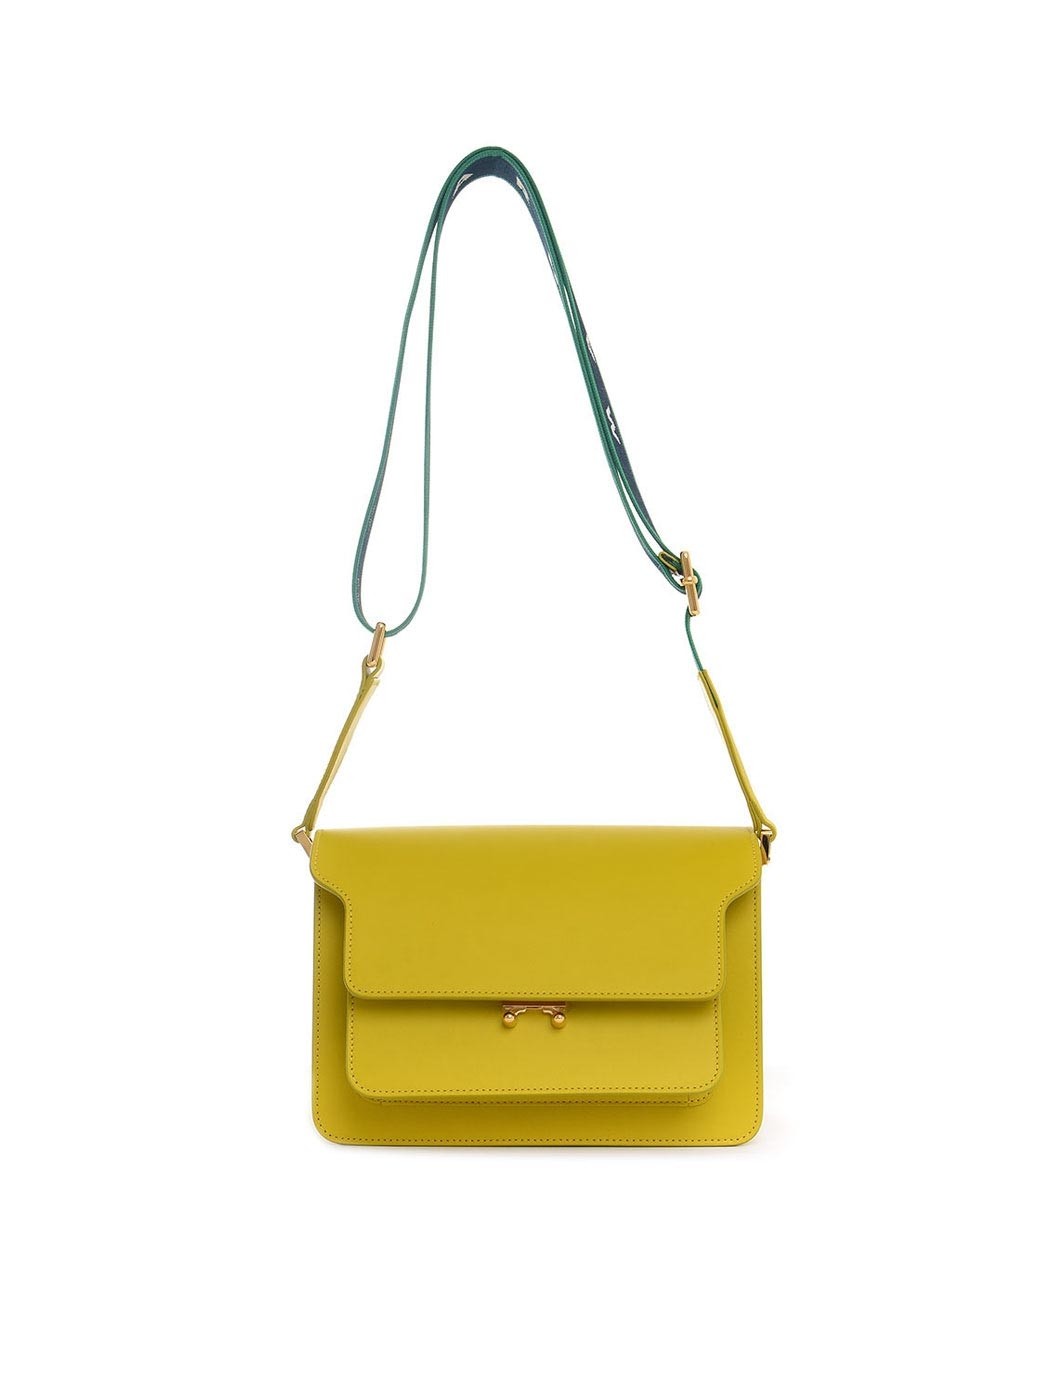  WOMAN BAGS,SPRING SUMMER COLLECTION,GIVENCHY BAGS,MARNI BAGS,LES PETITS JOUEURS BAGS  MARNI SBMPN09T06